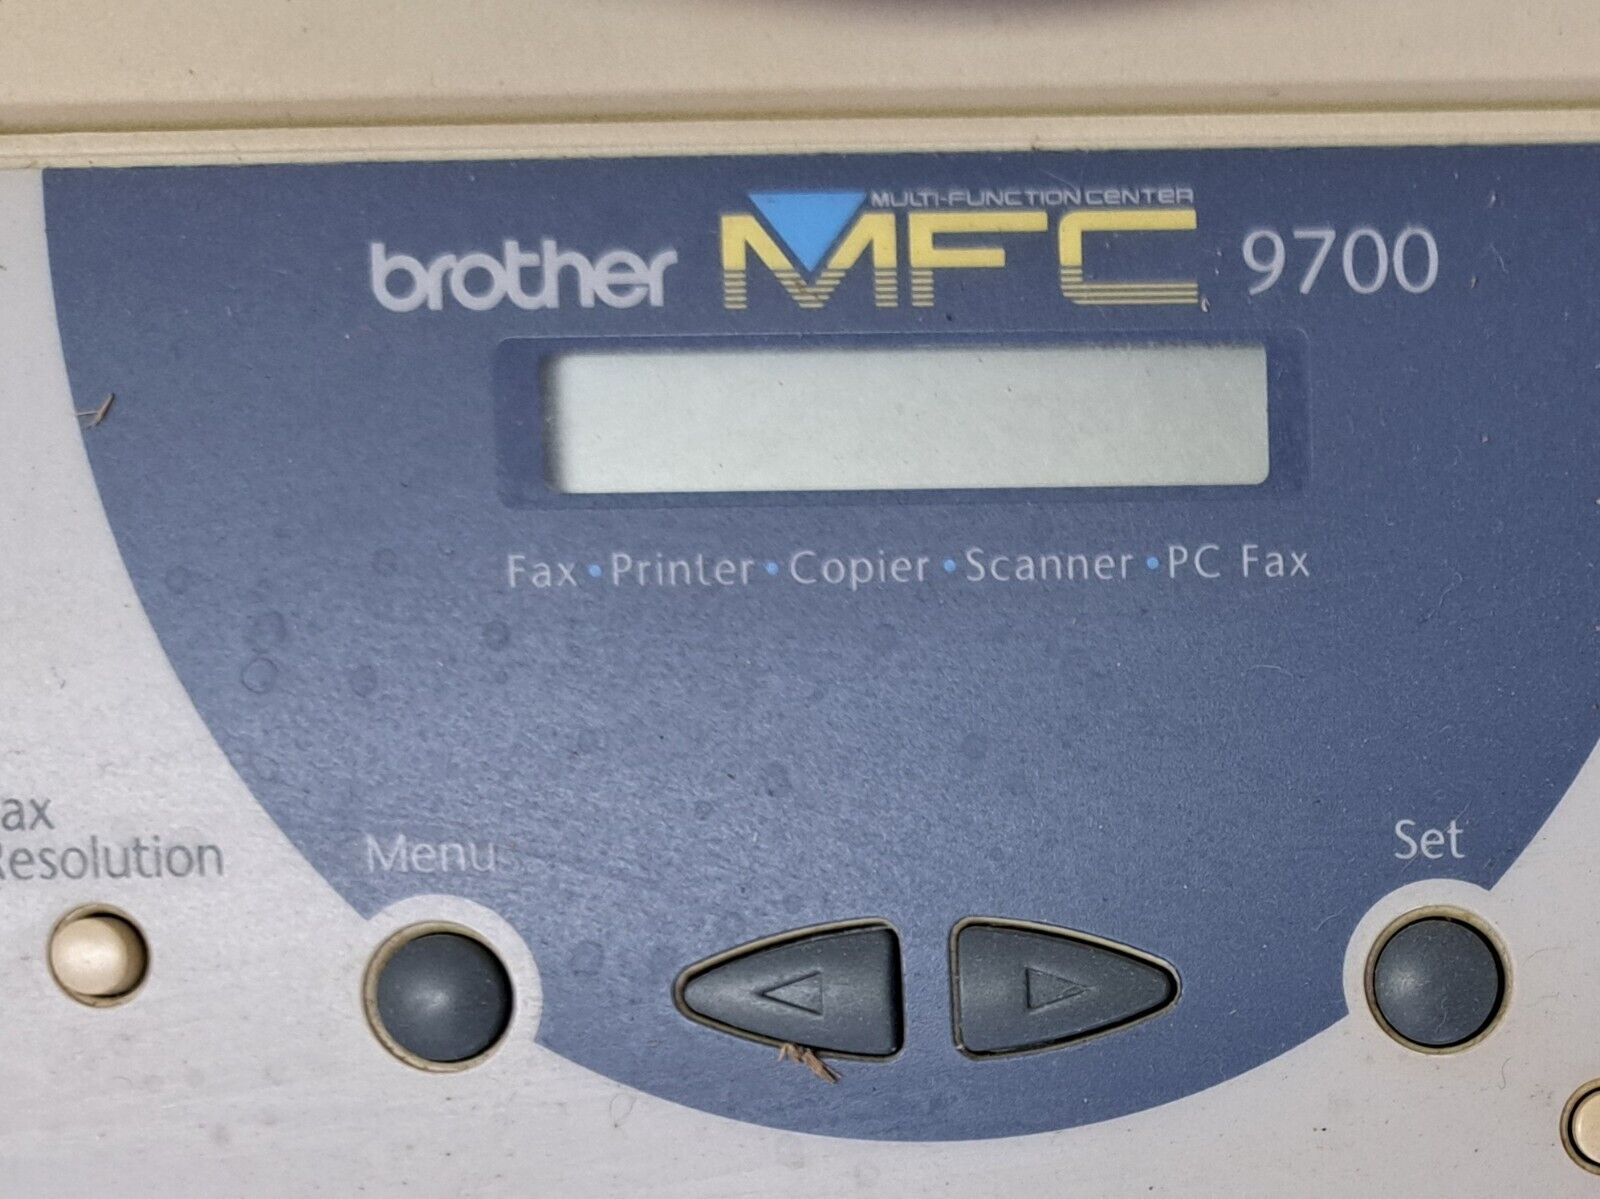 Brother MFC-9700  All-in-One Laser Printer. LOCAL PICK-UP ONLY